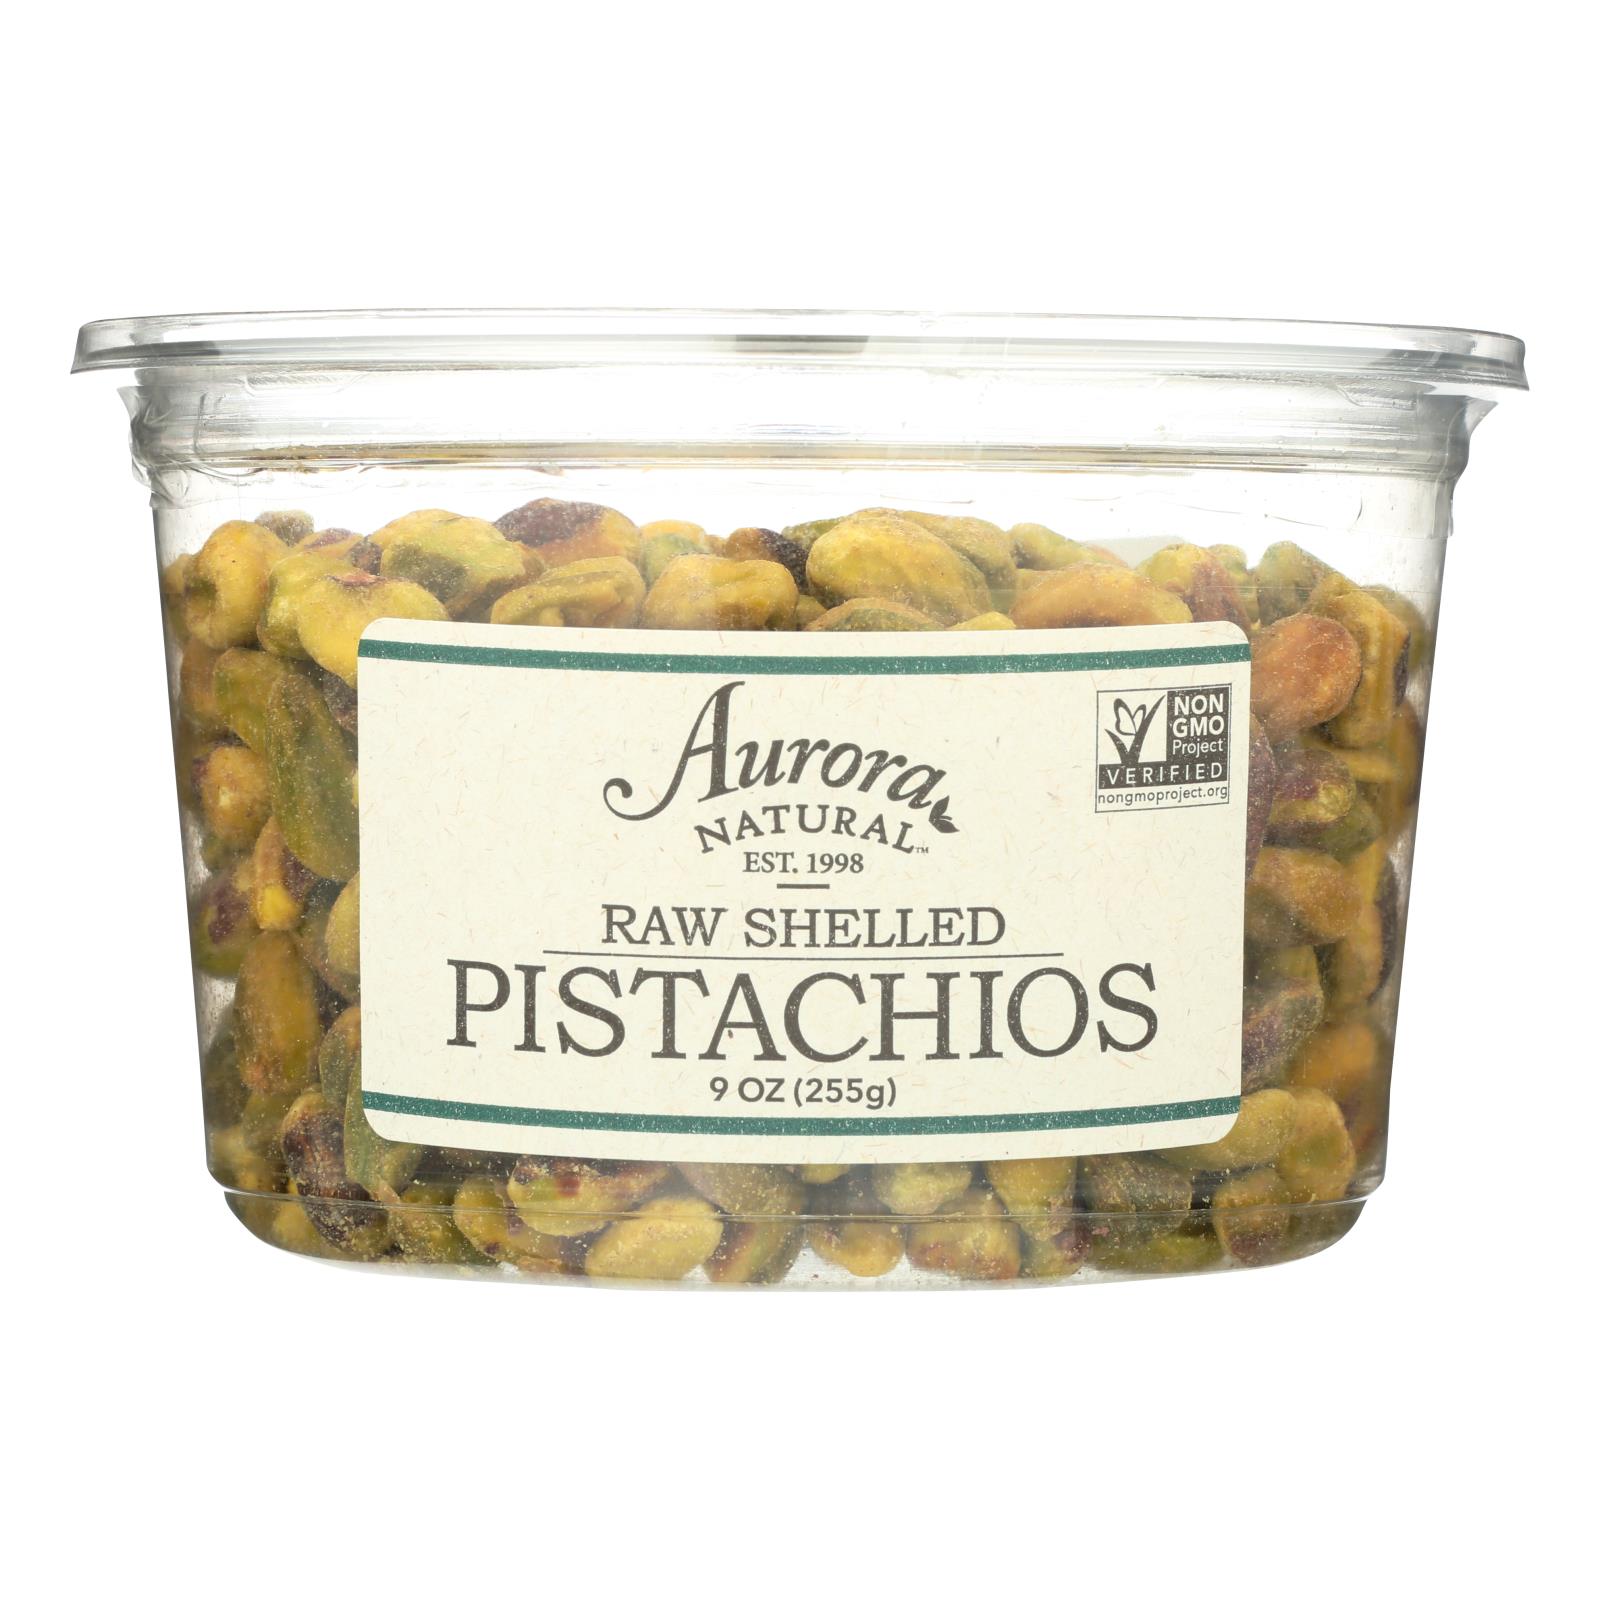 Aurora Natural Products - Raw Shelled Pistachios - 12개 묶음상품 - 9 oz.